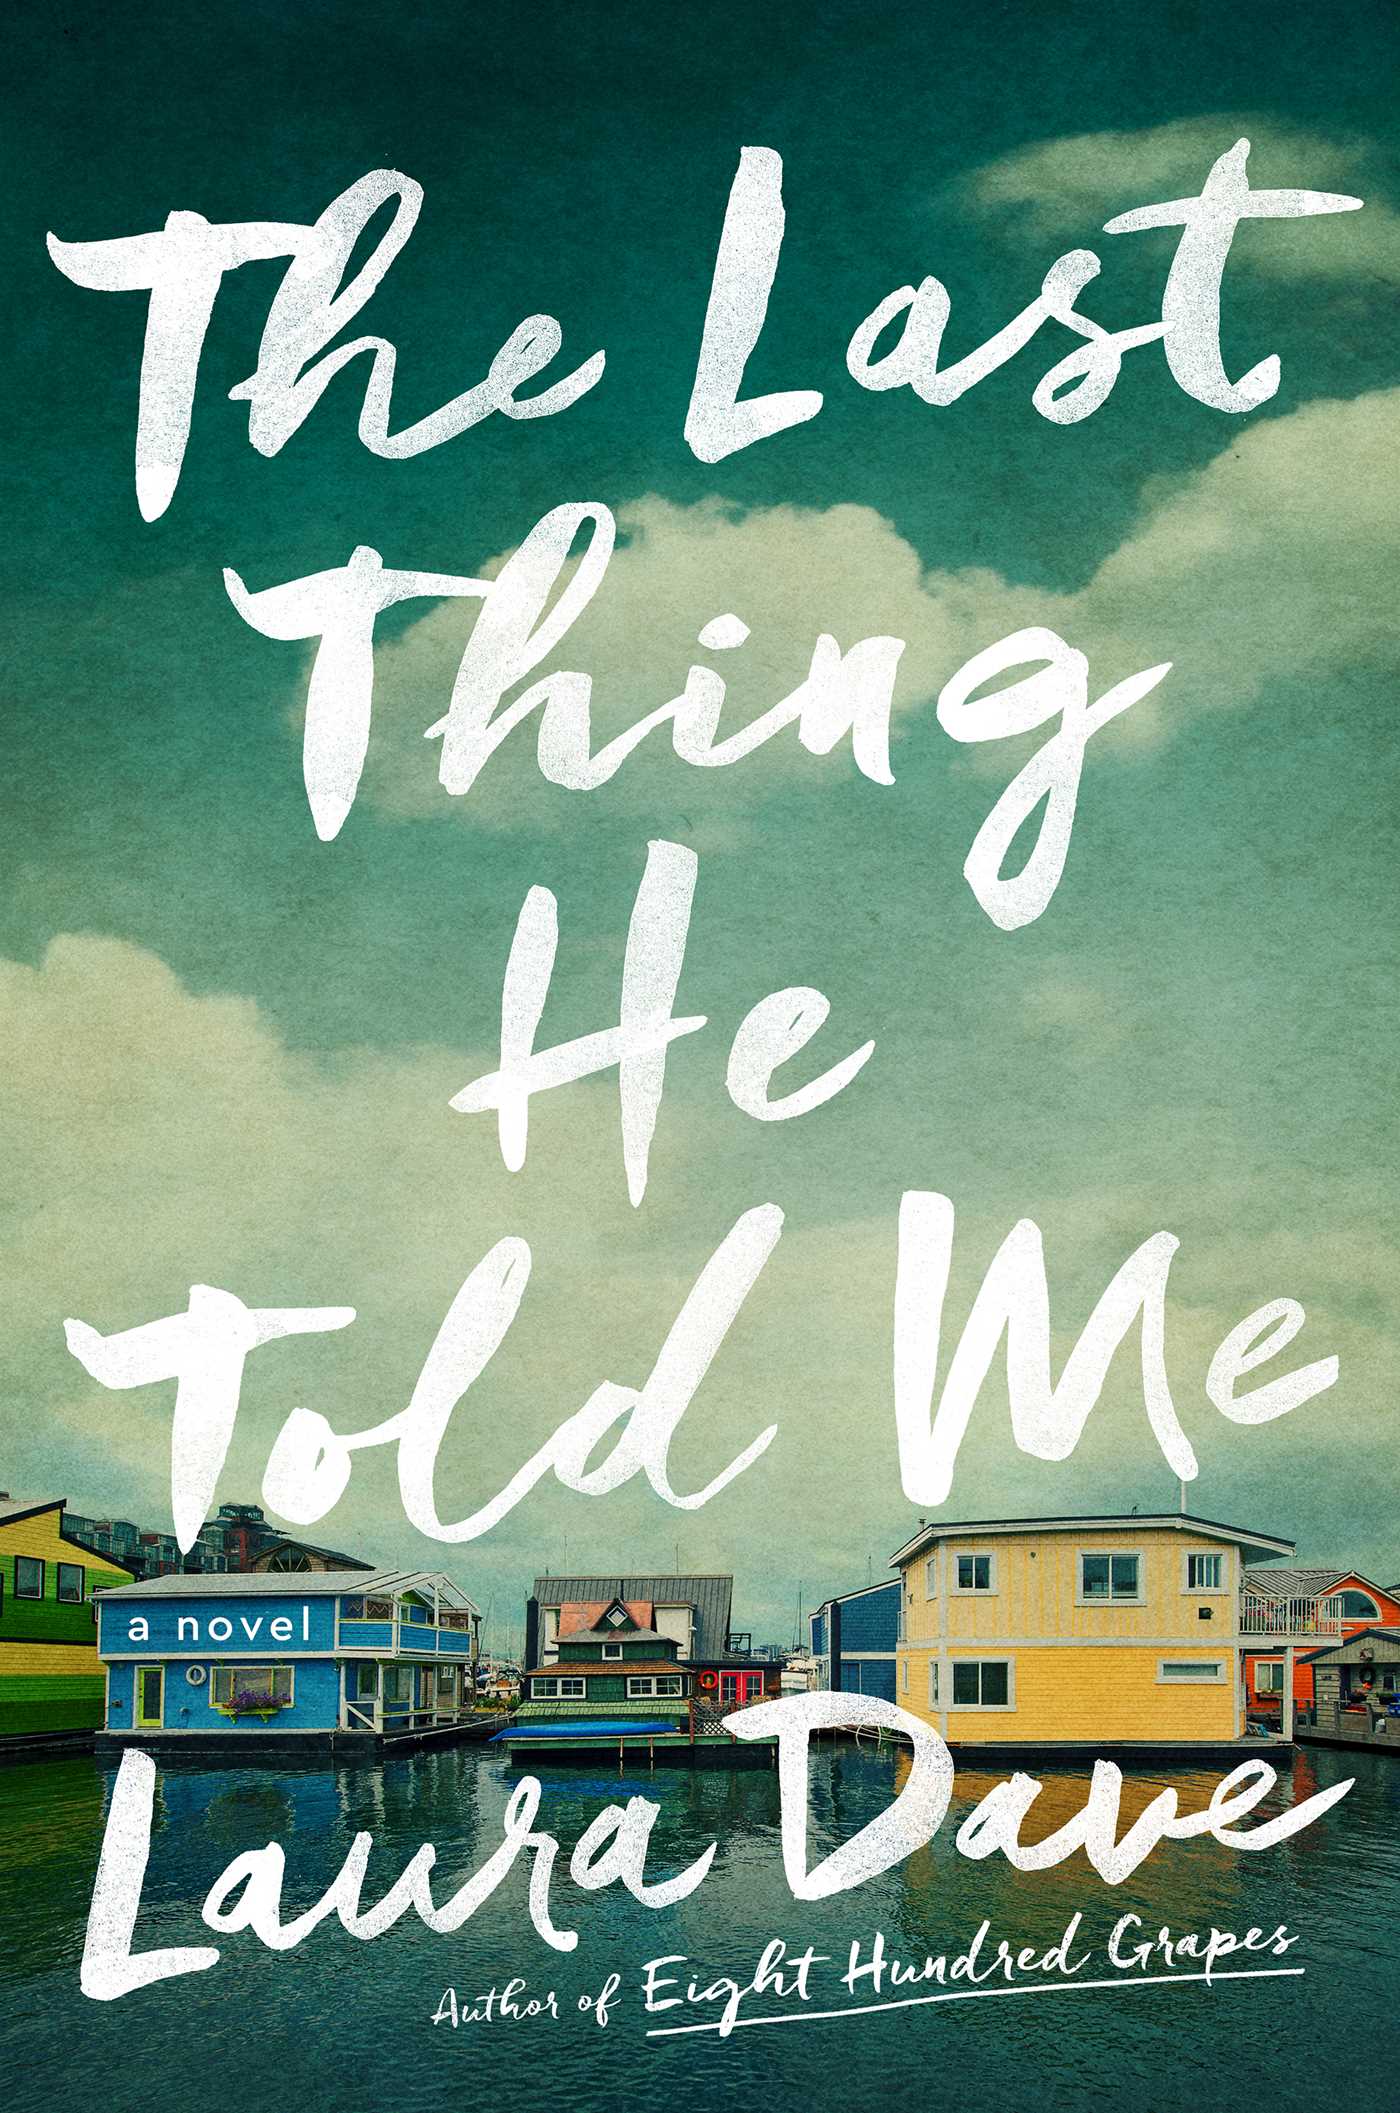 The cover of the book, featuring a sea side town and the title written in white writing.